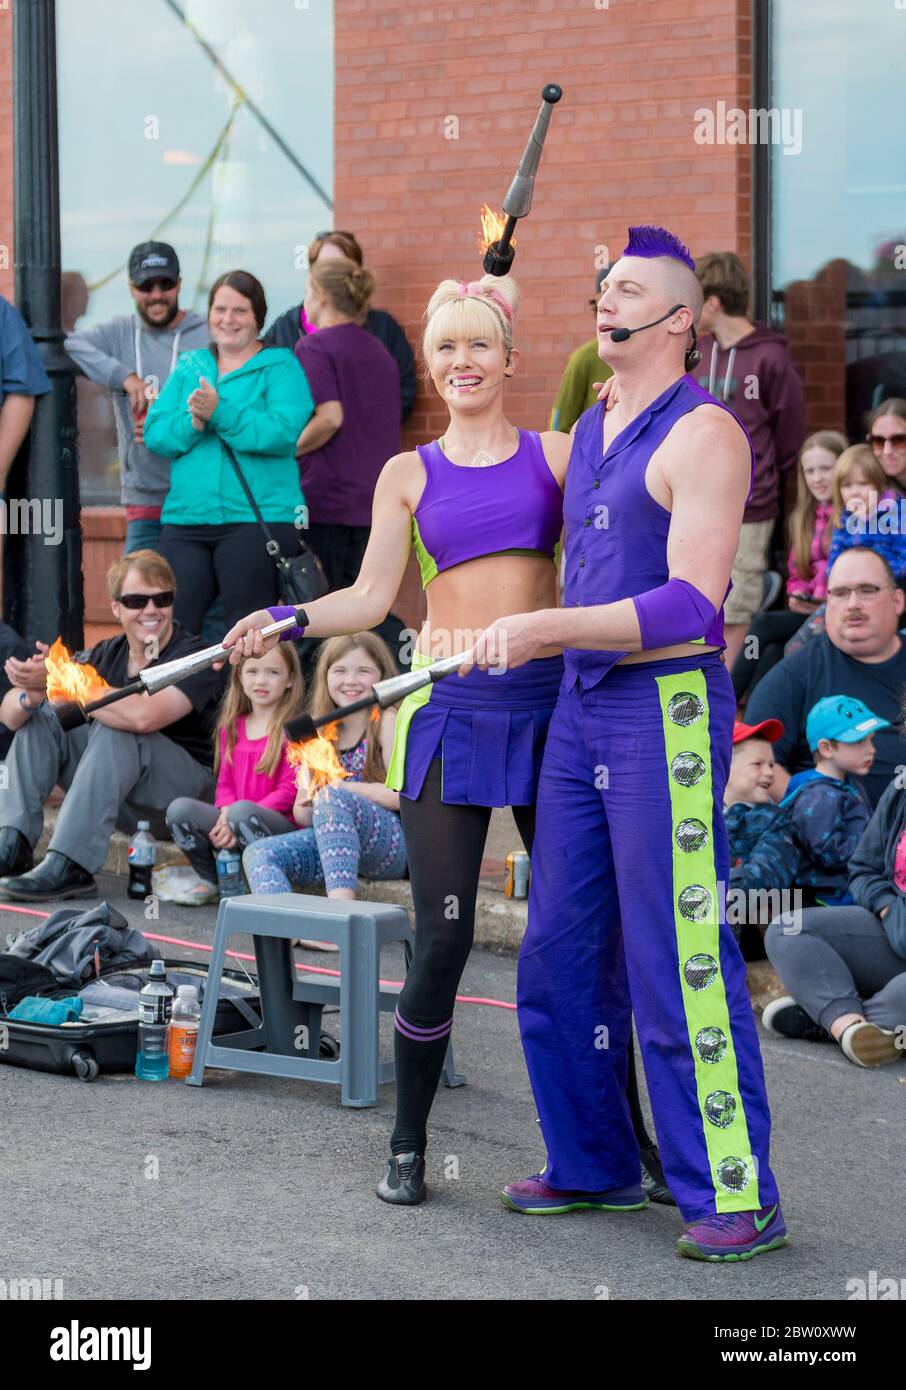 Saint John, New Brunswick, Canada - July 13, 2017: Annual Buskers Festival. A man and woman both dressed in purple juggle fire batons together. Stock Photo